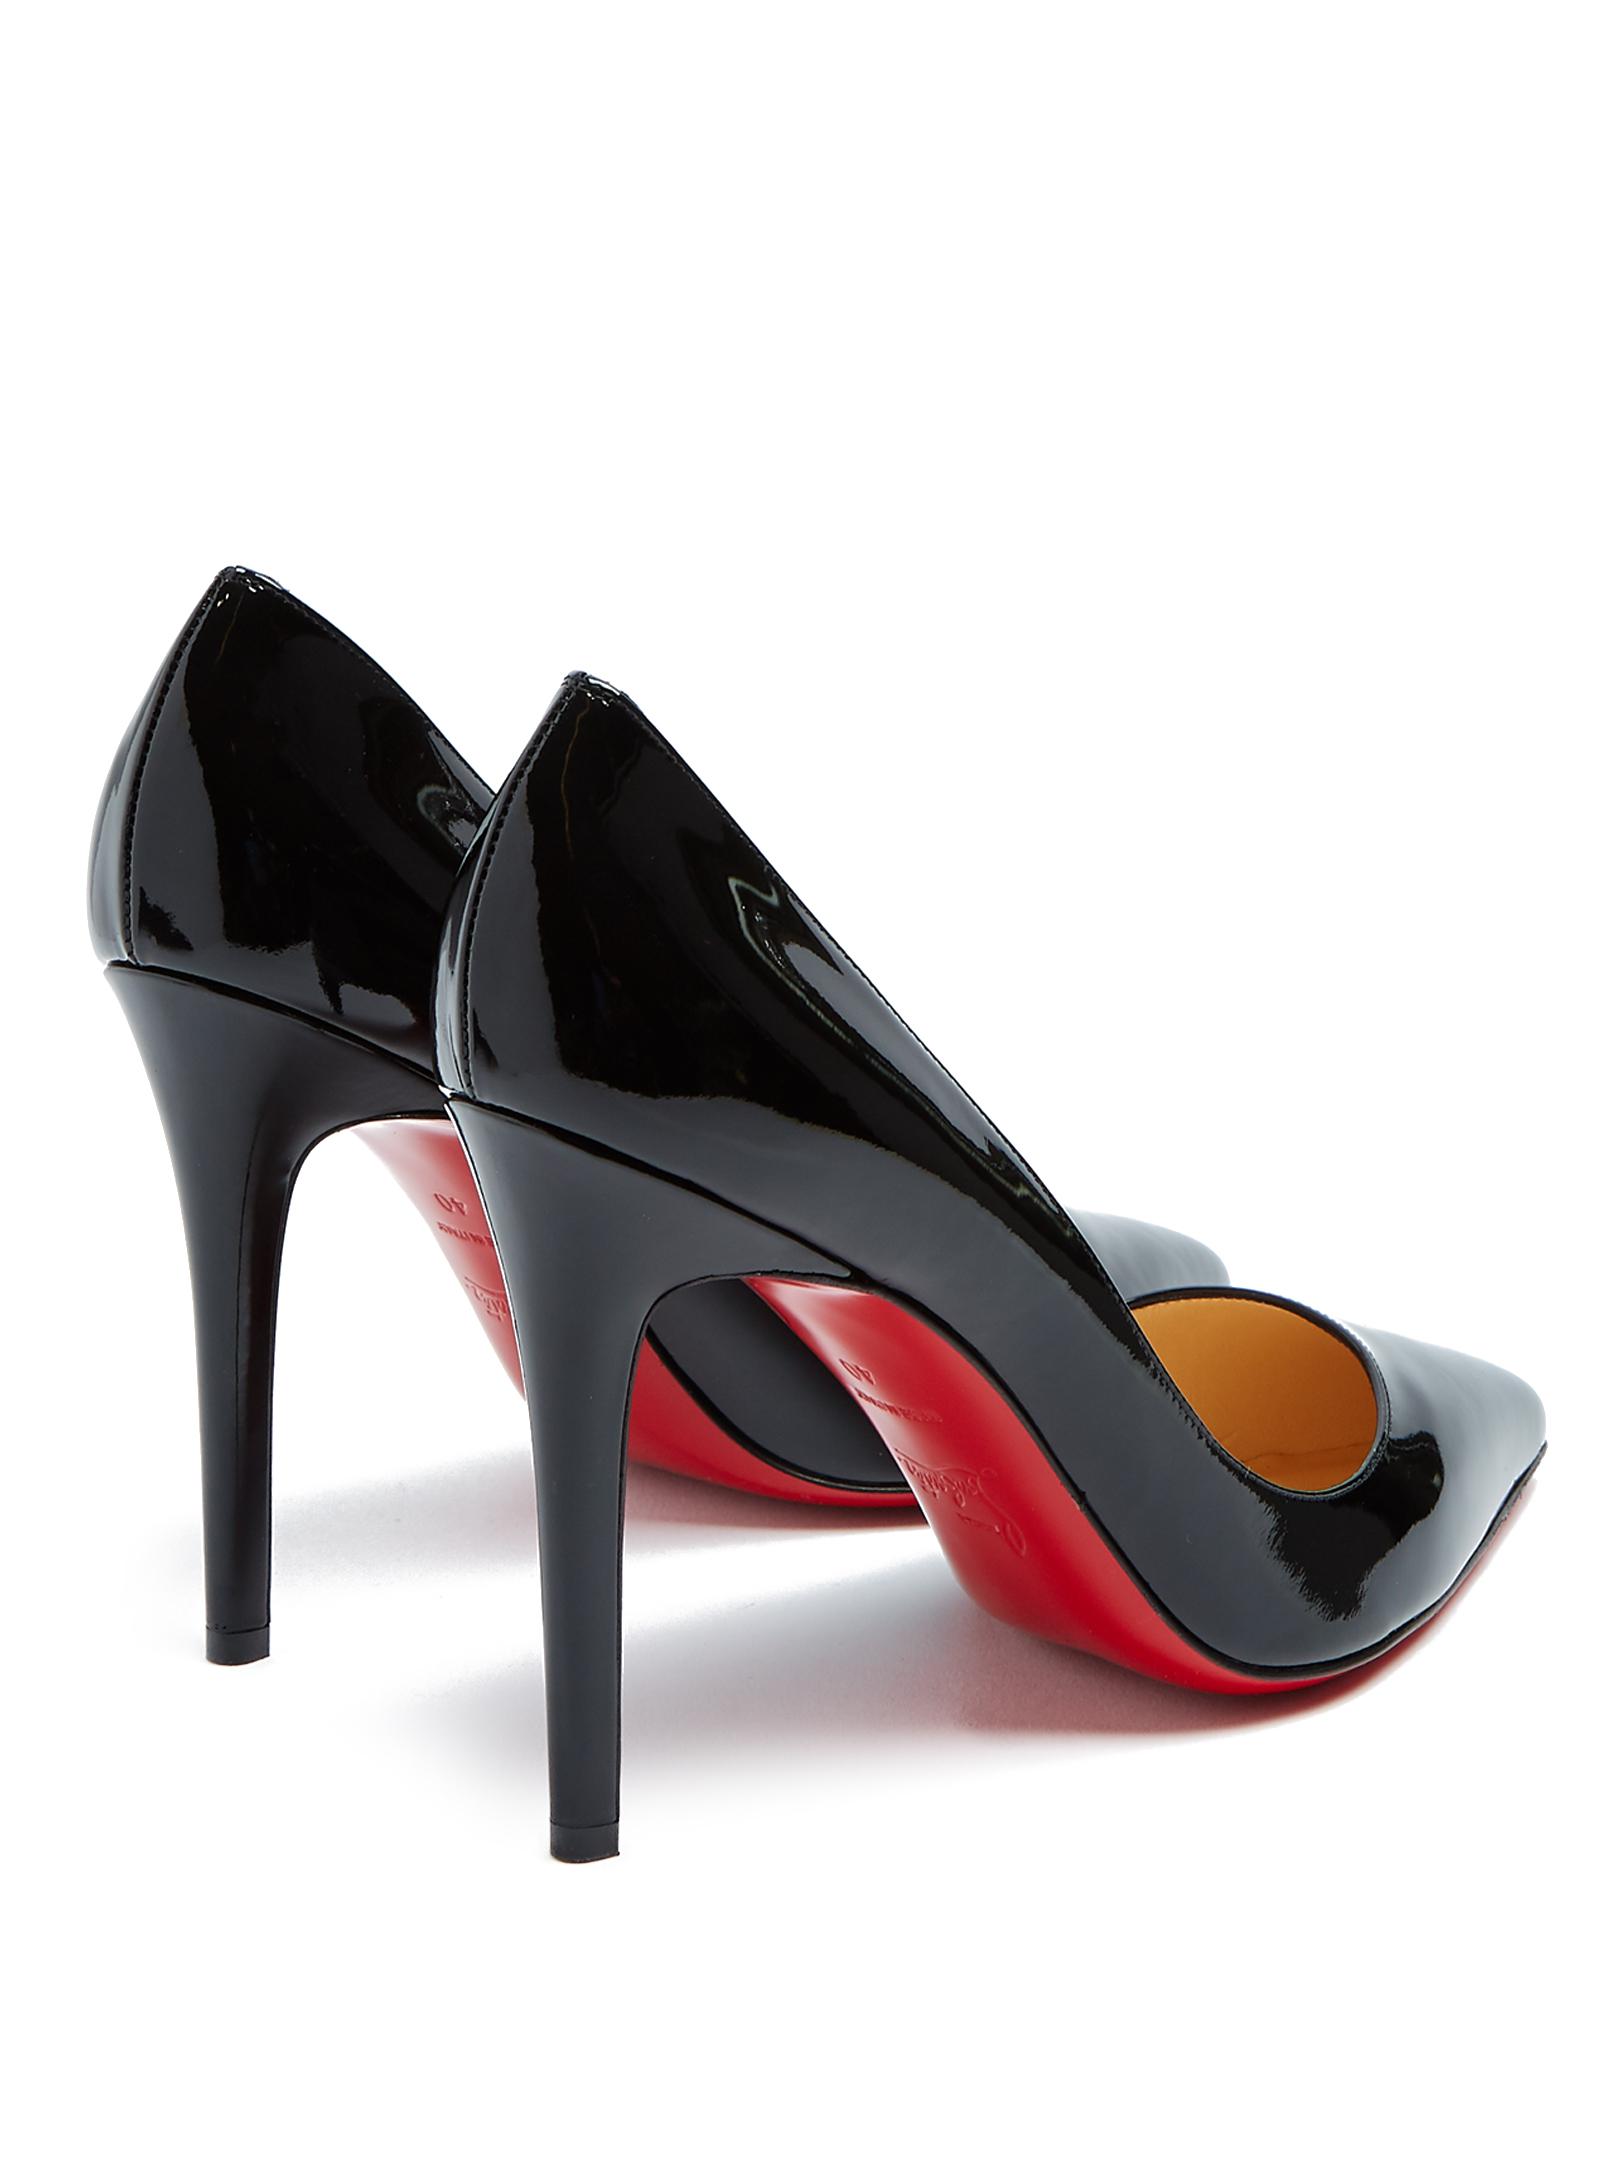 Christian Louboutin Pigalle 100mm Patent-leather Pumps in Black - Lyst